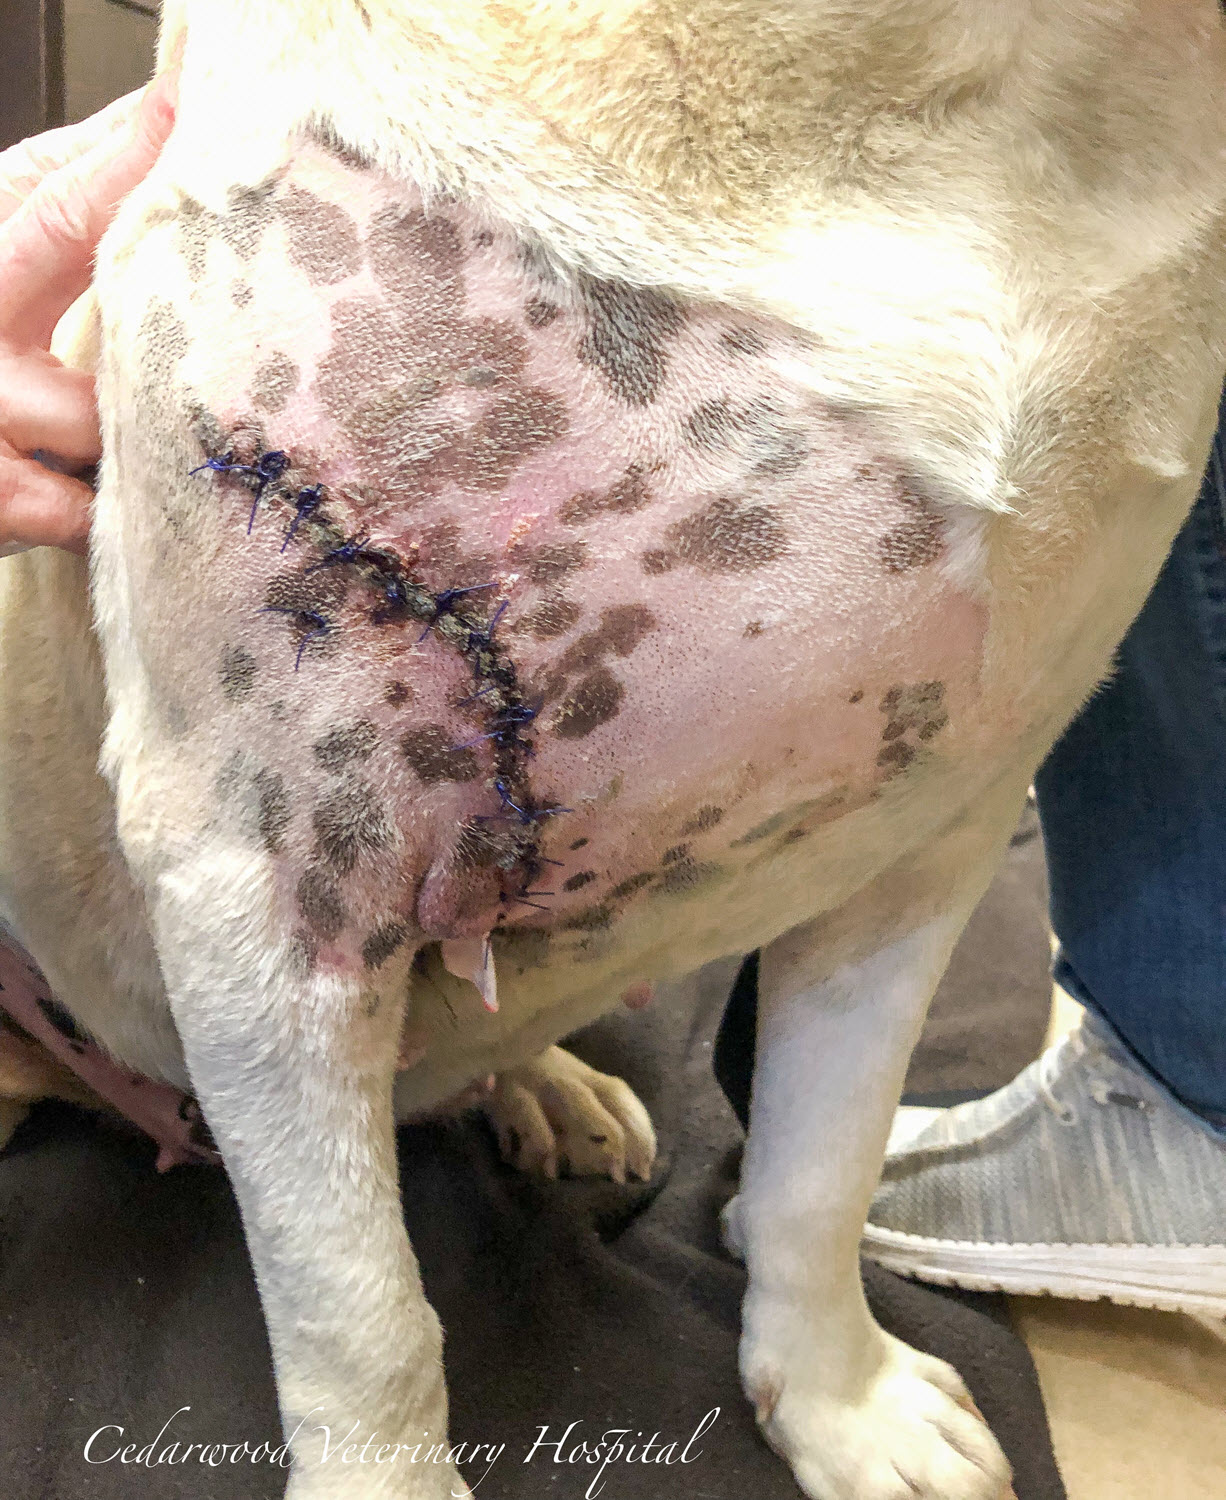 Wound was debrided, drain placed and sutured